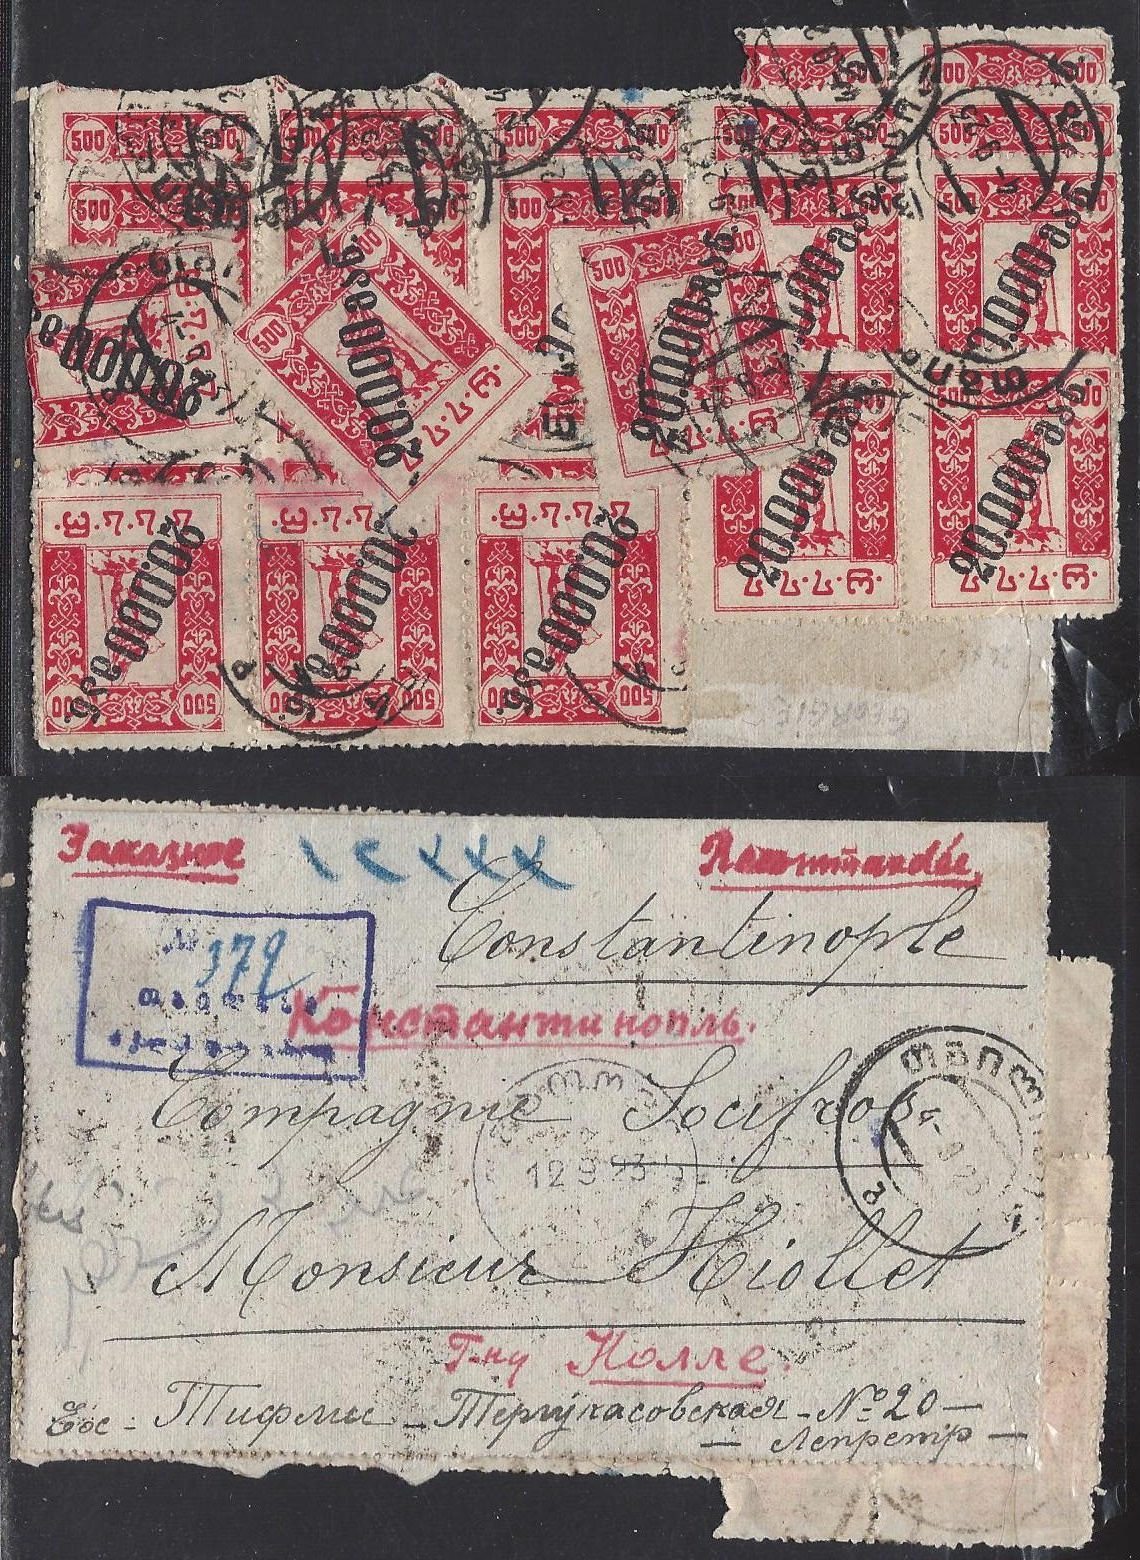 Russia Postal History - Georgia Independent and Soviet issues Scott 1923 